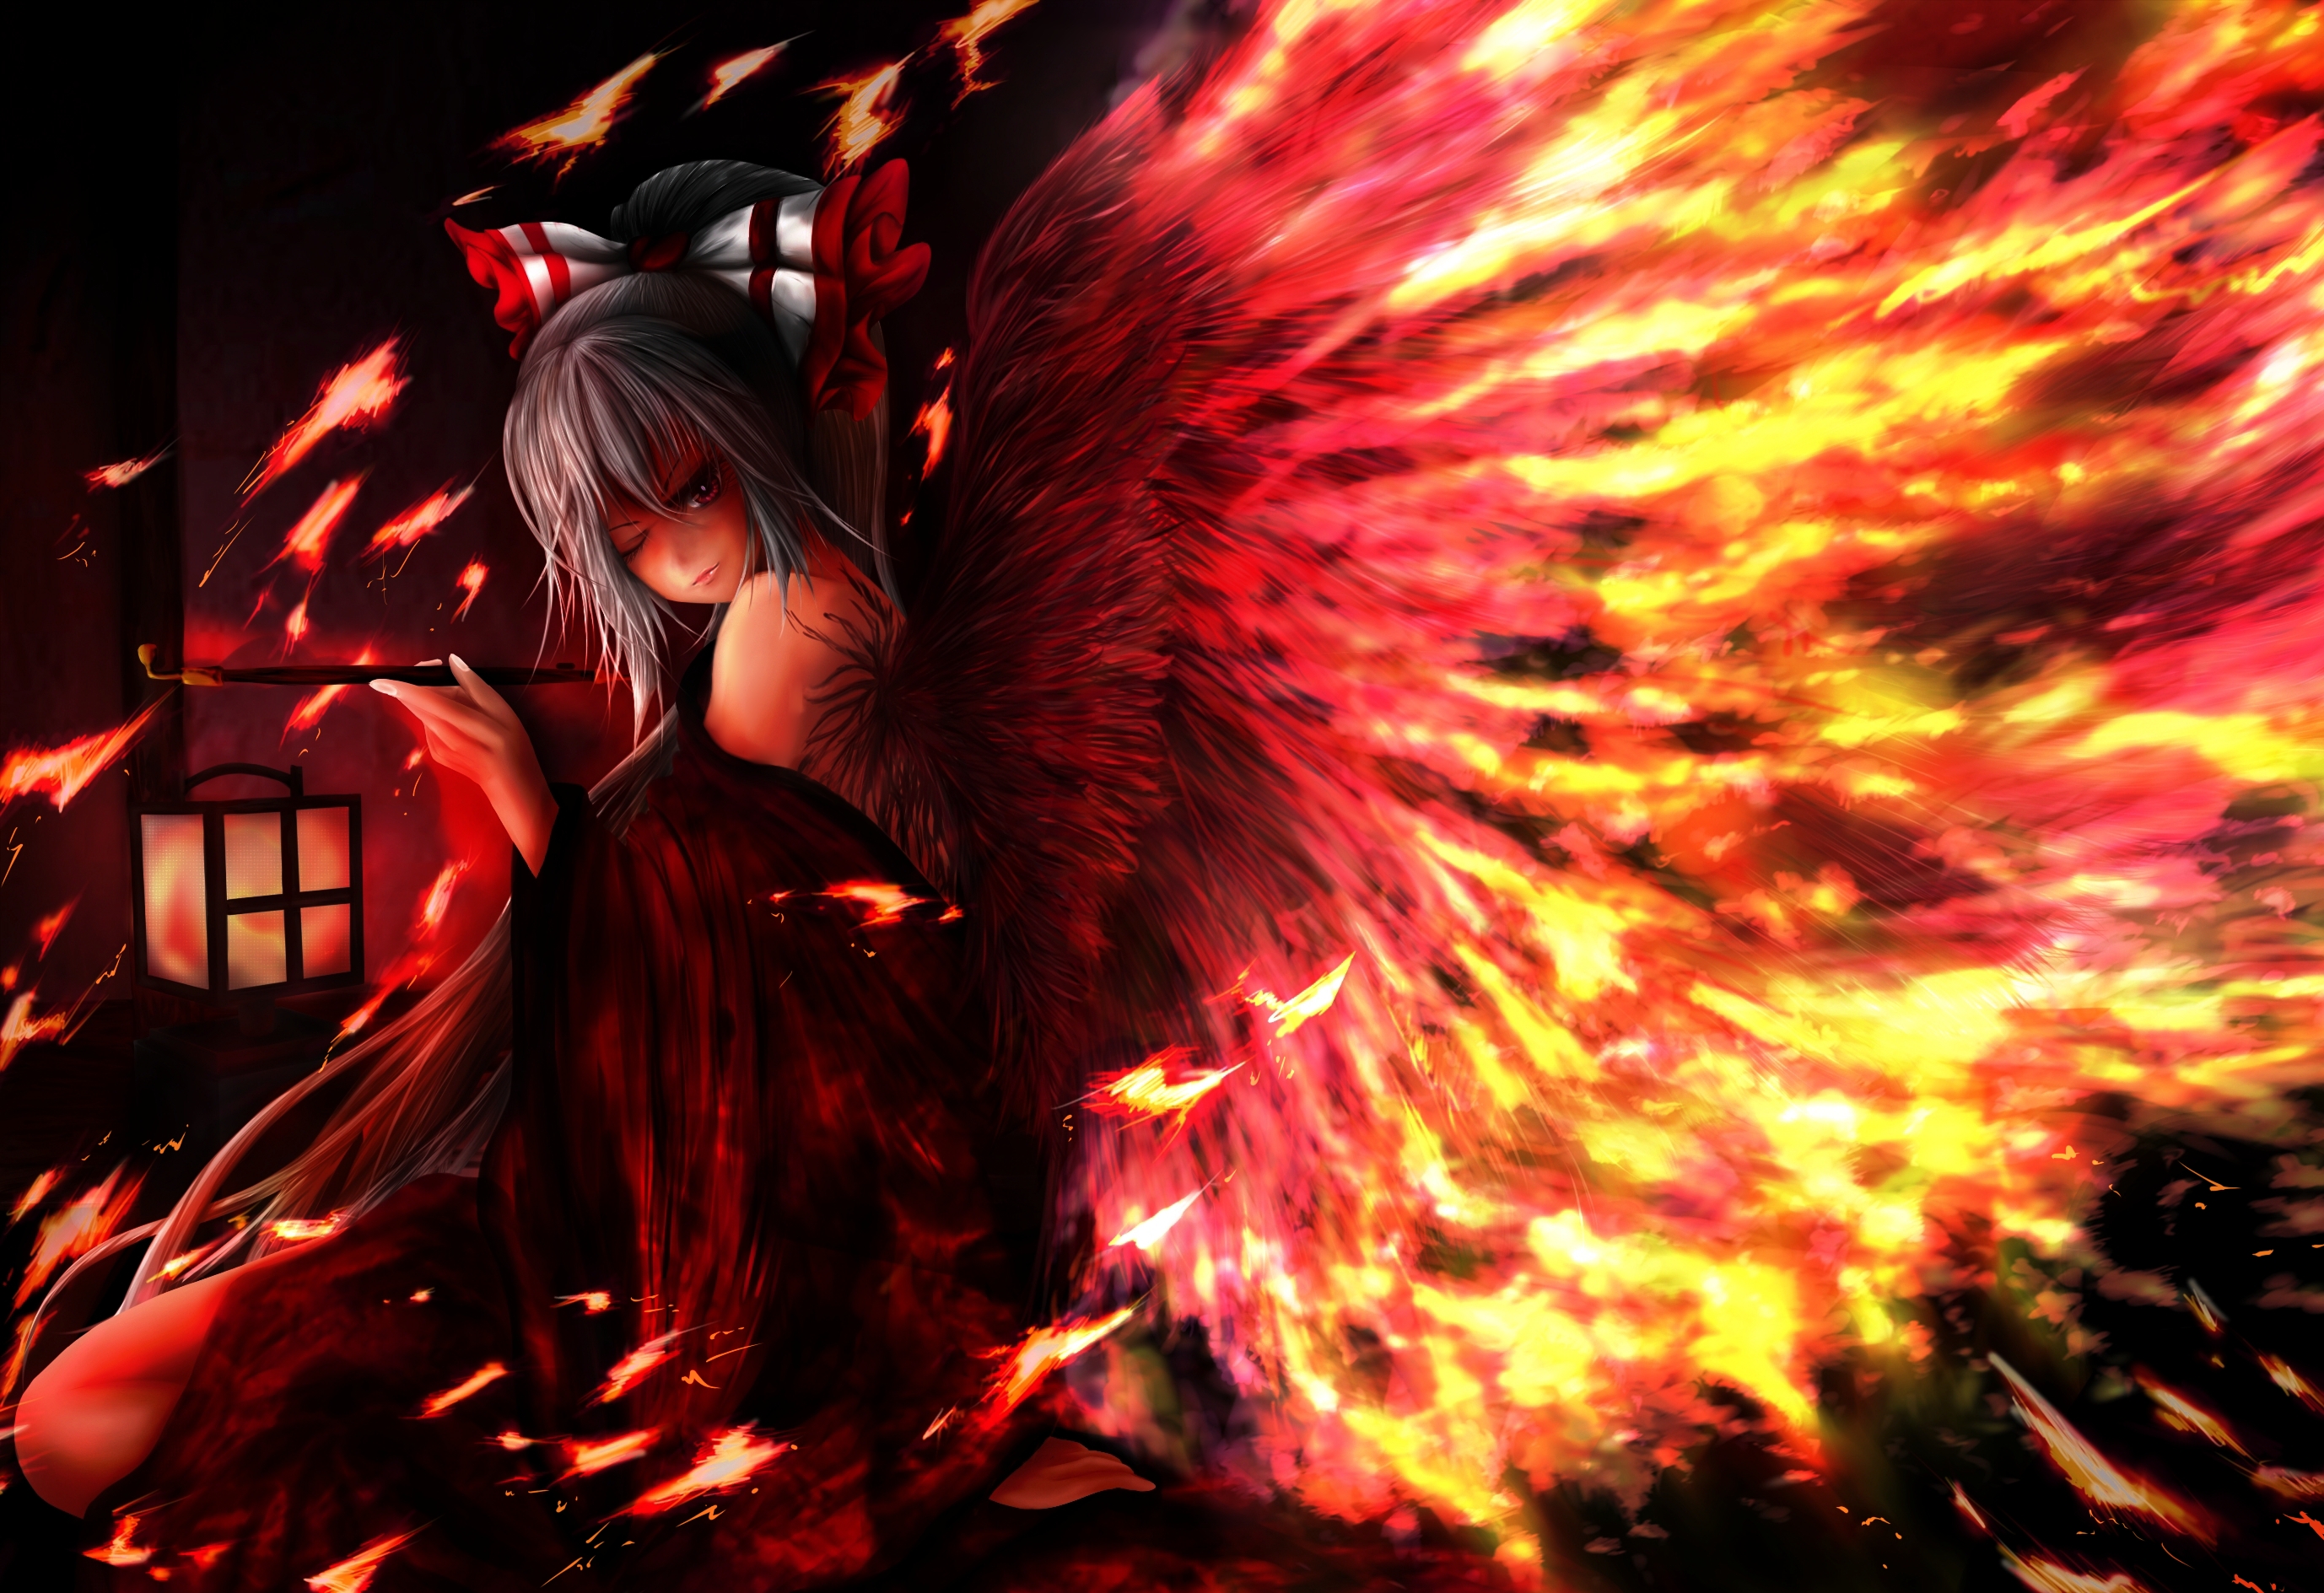 touhou, Fantasy, Vector, Art, Angels, Fire, Wings, Girl, Gothic, Dark